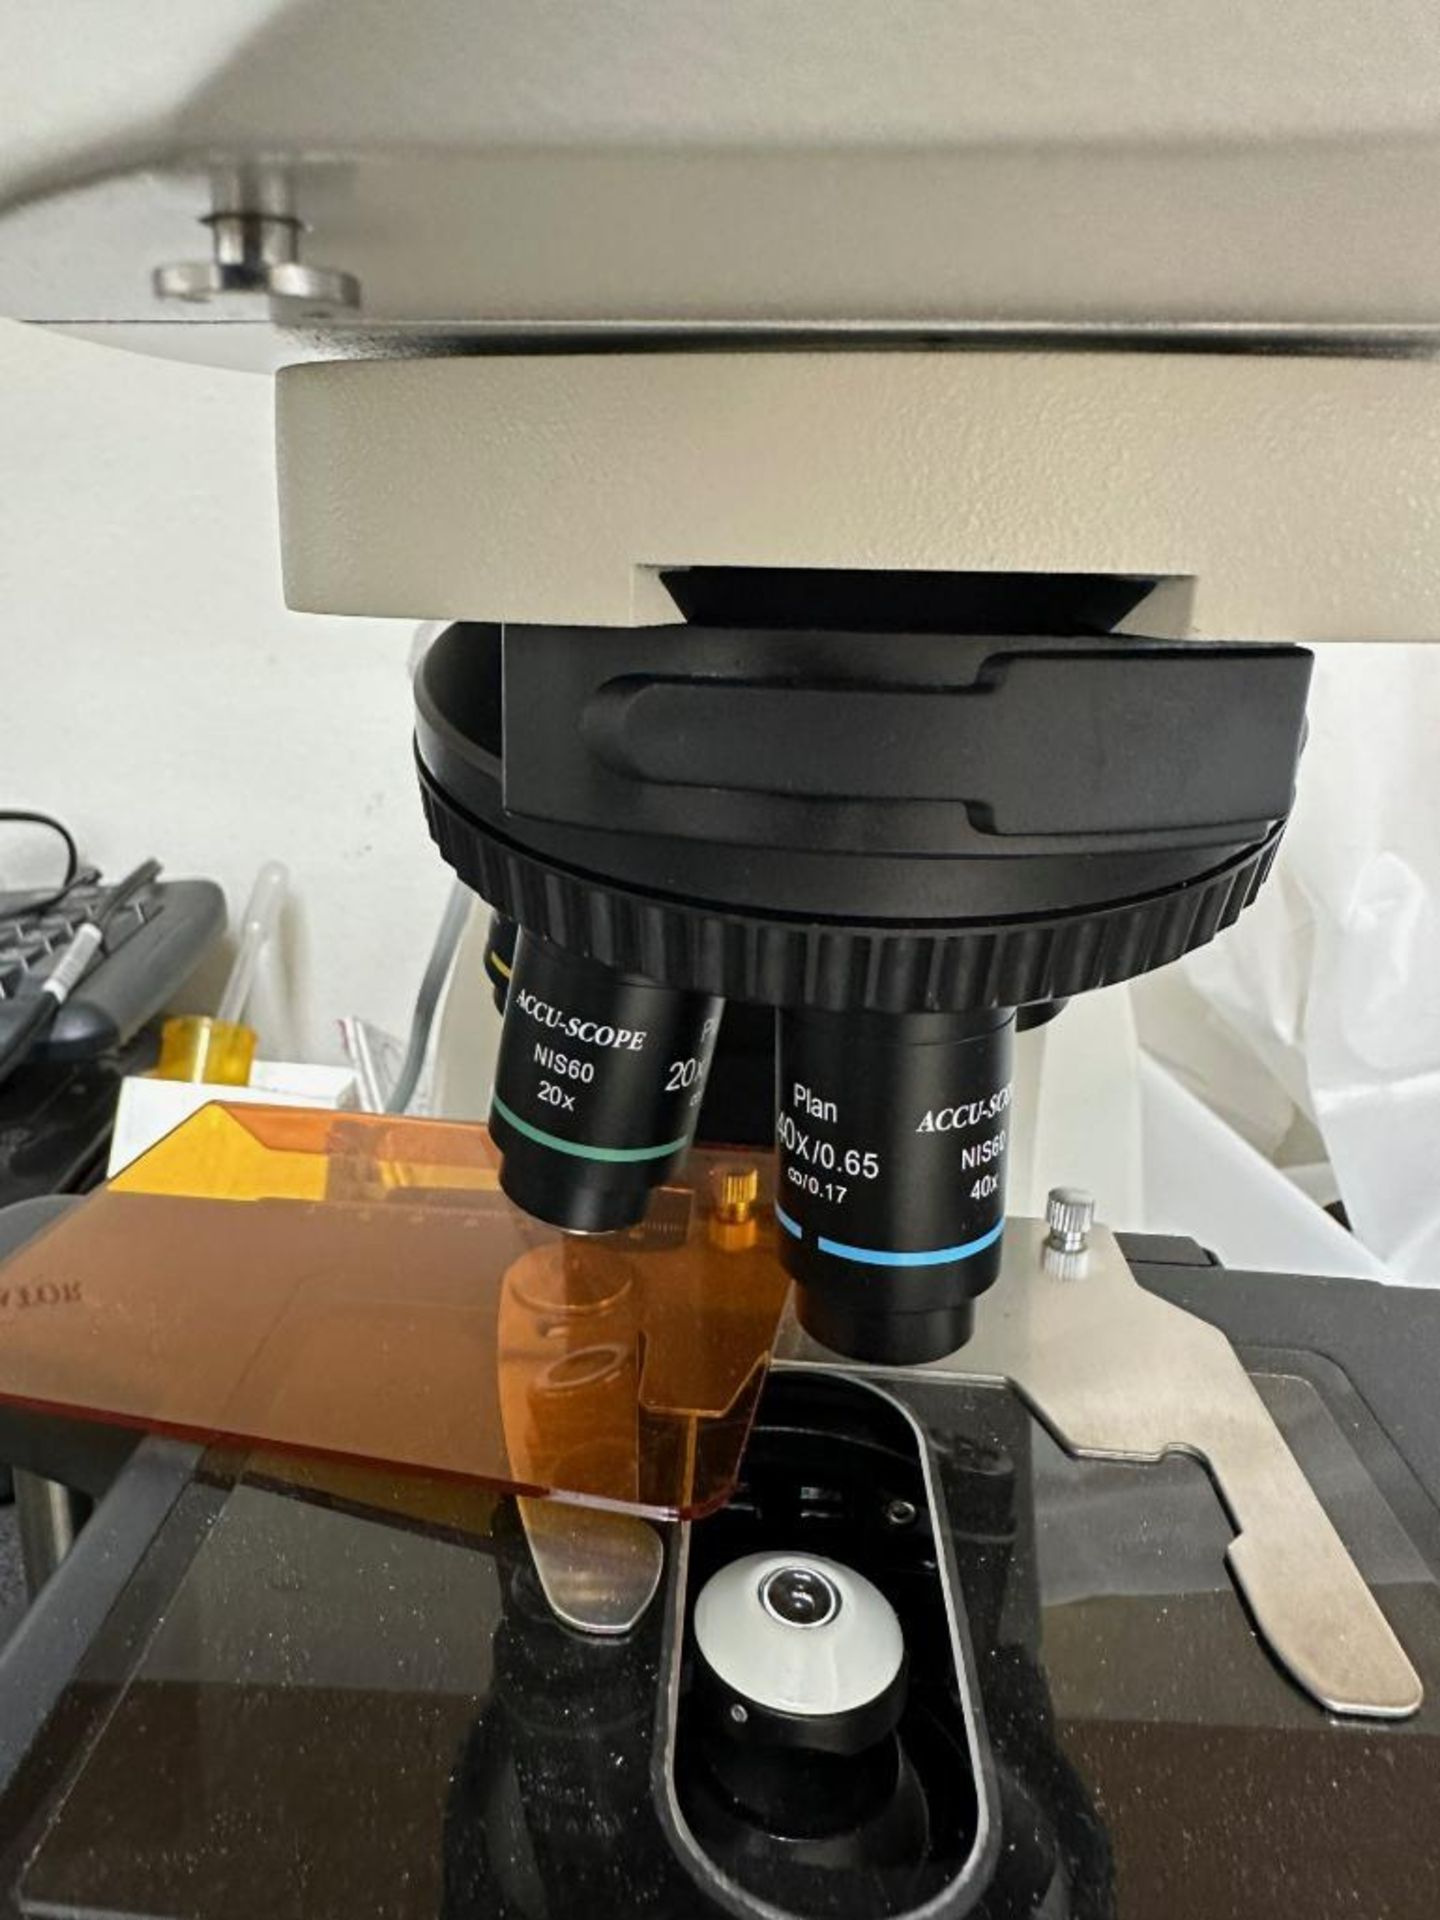 ACCU-SCOPE LAB MICROSCOPE WITH 5 OBJECTIVES - Image 4 of 6